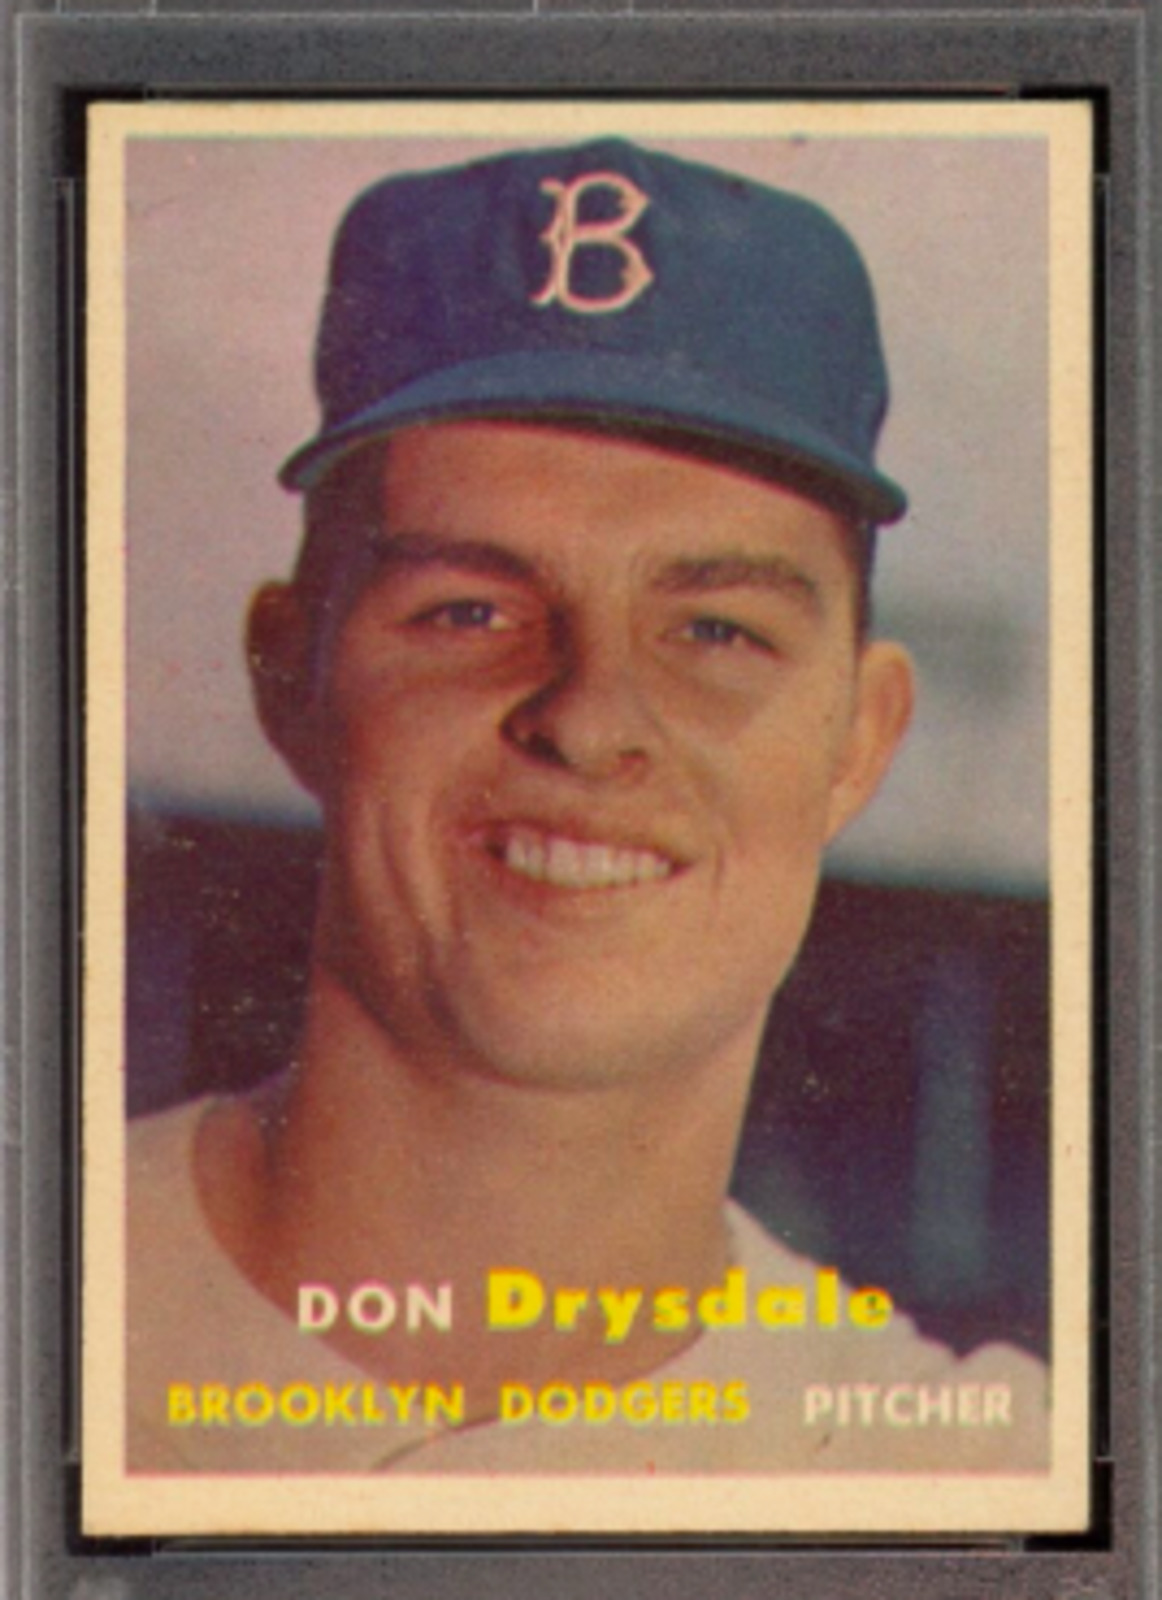 1957 Topps Don Drysdale rookie card